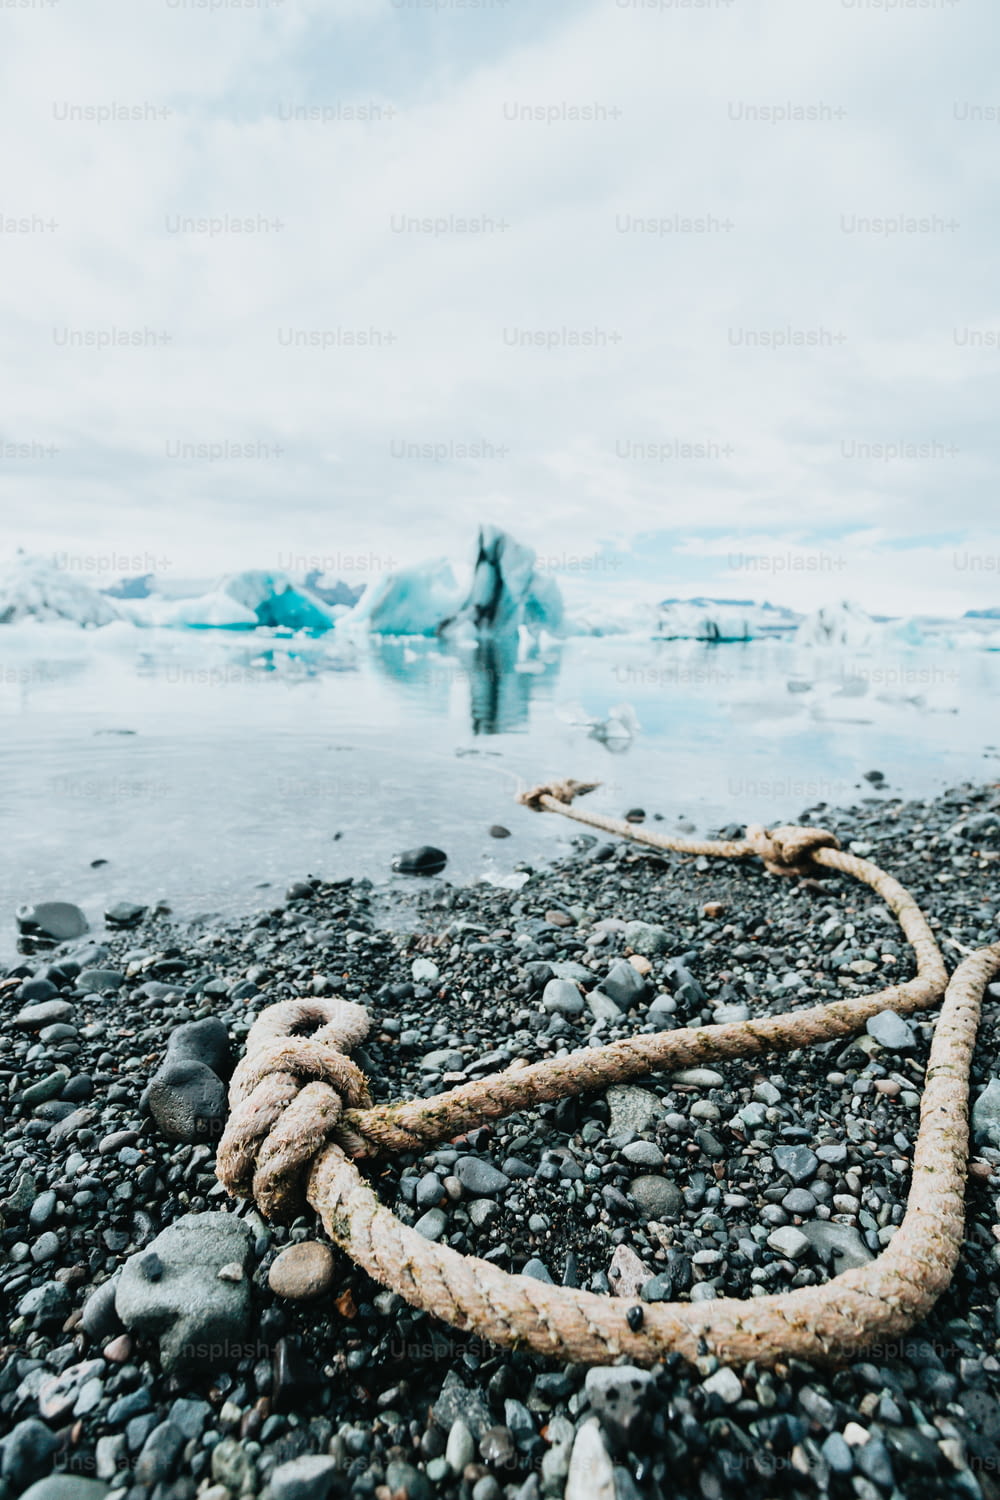 a rope on a rocky beach with icebergs in the background